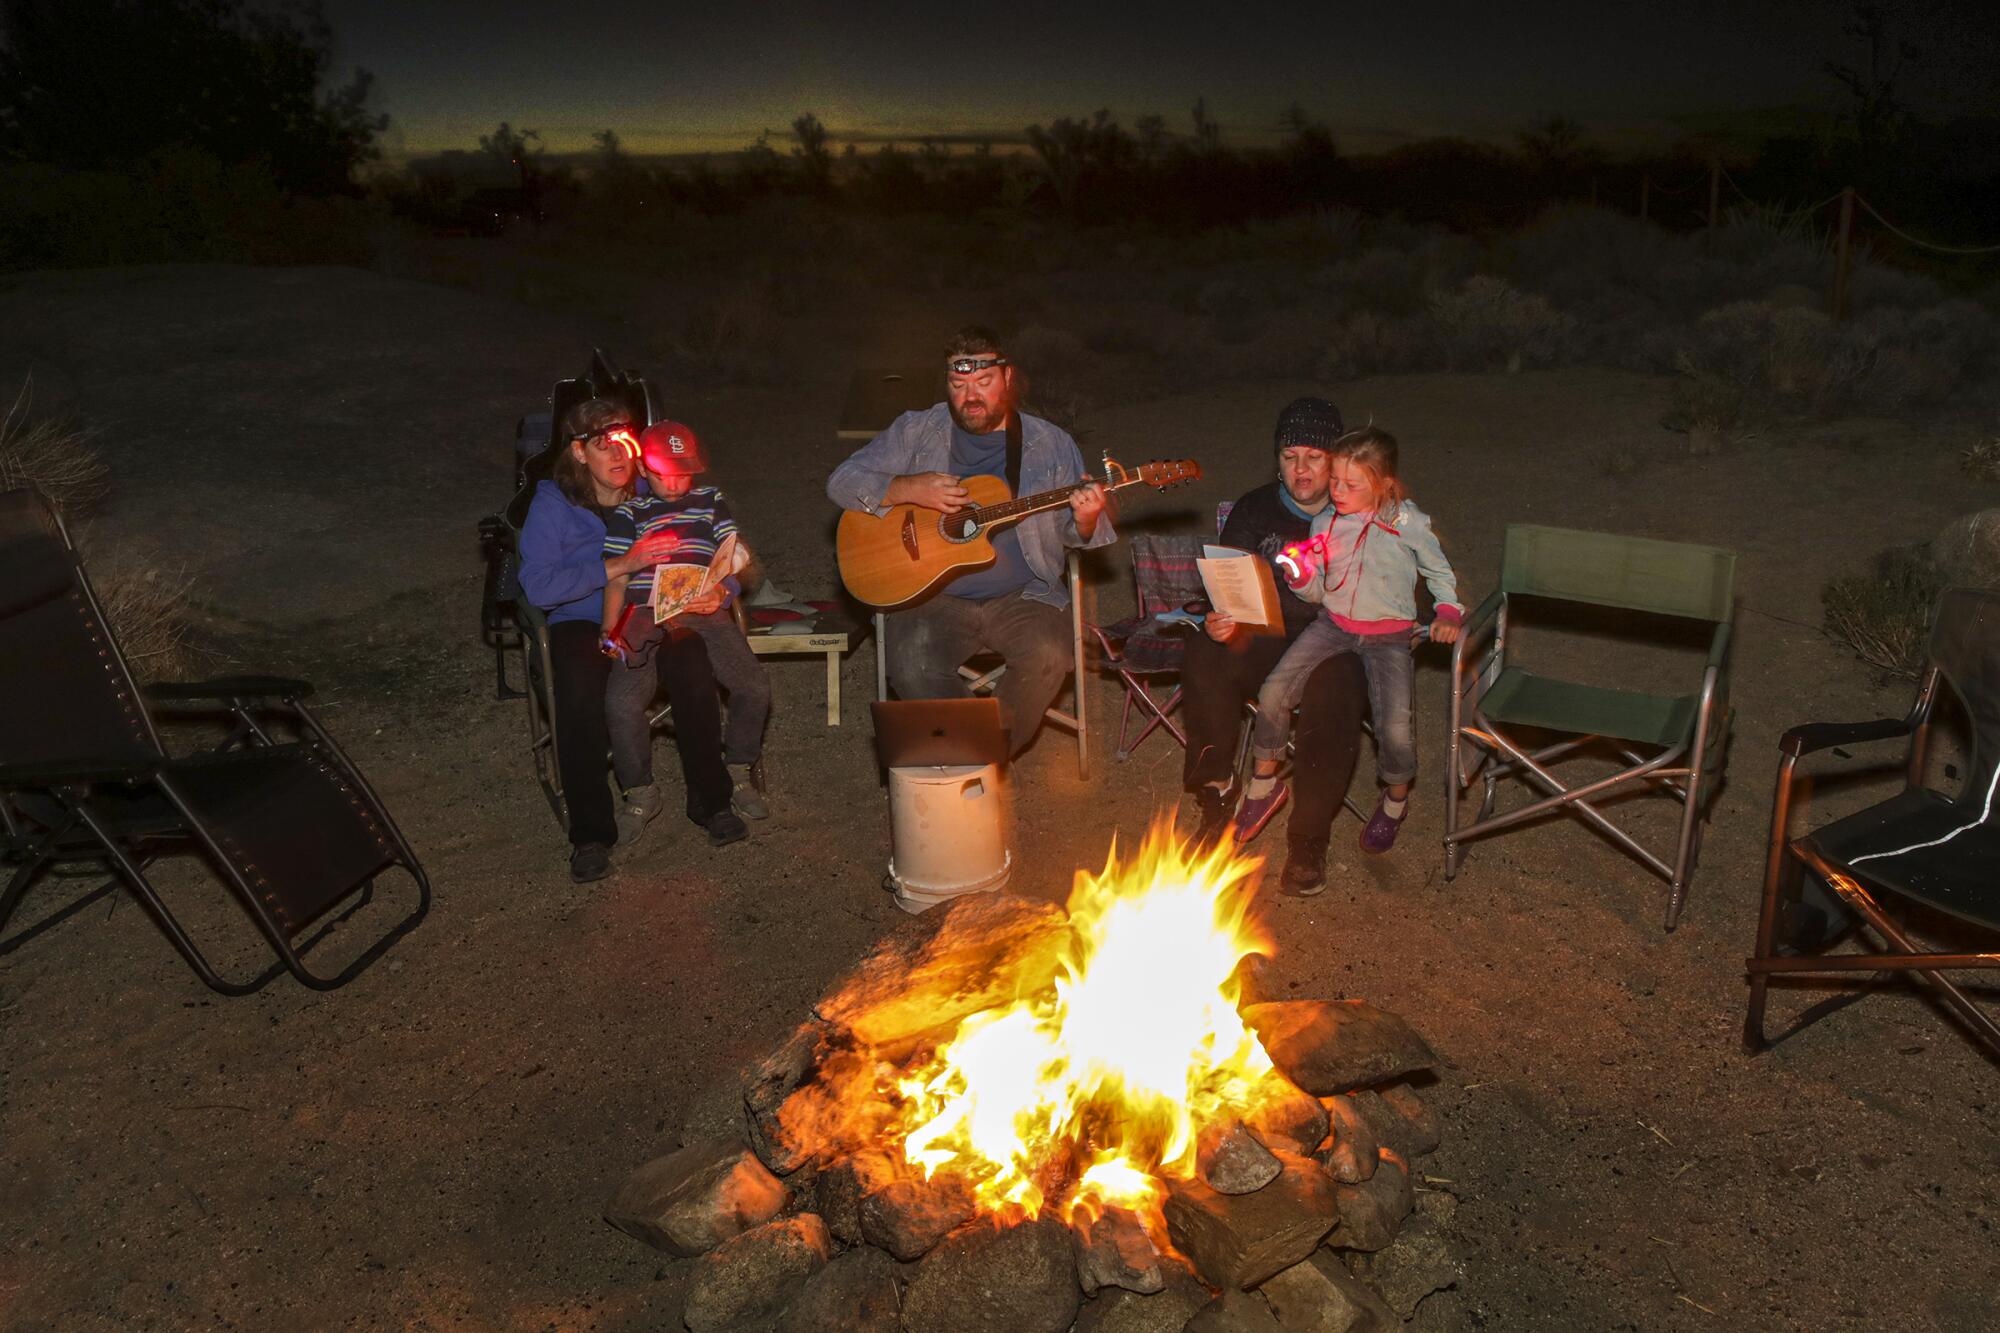 A man with a guitar and members of his family sit in folding chairs around a campfire at night